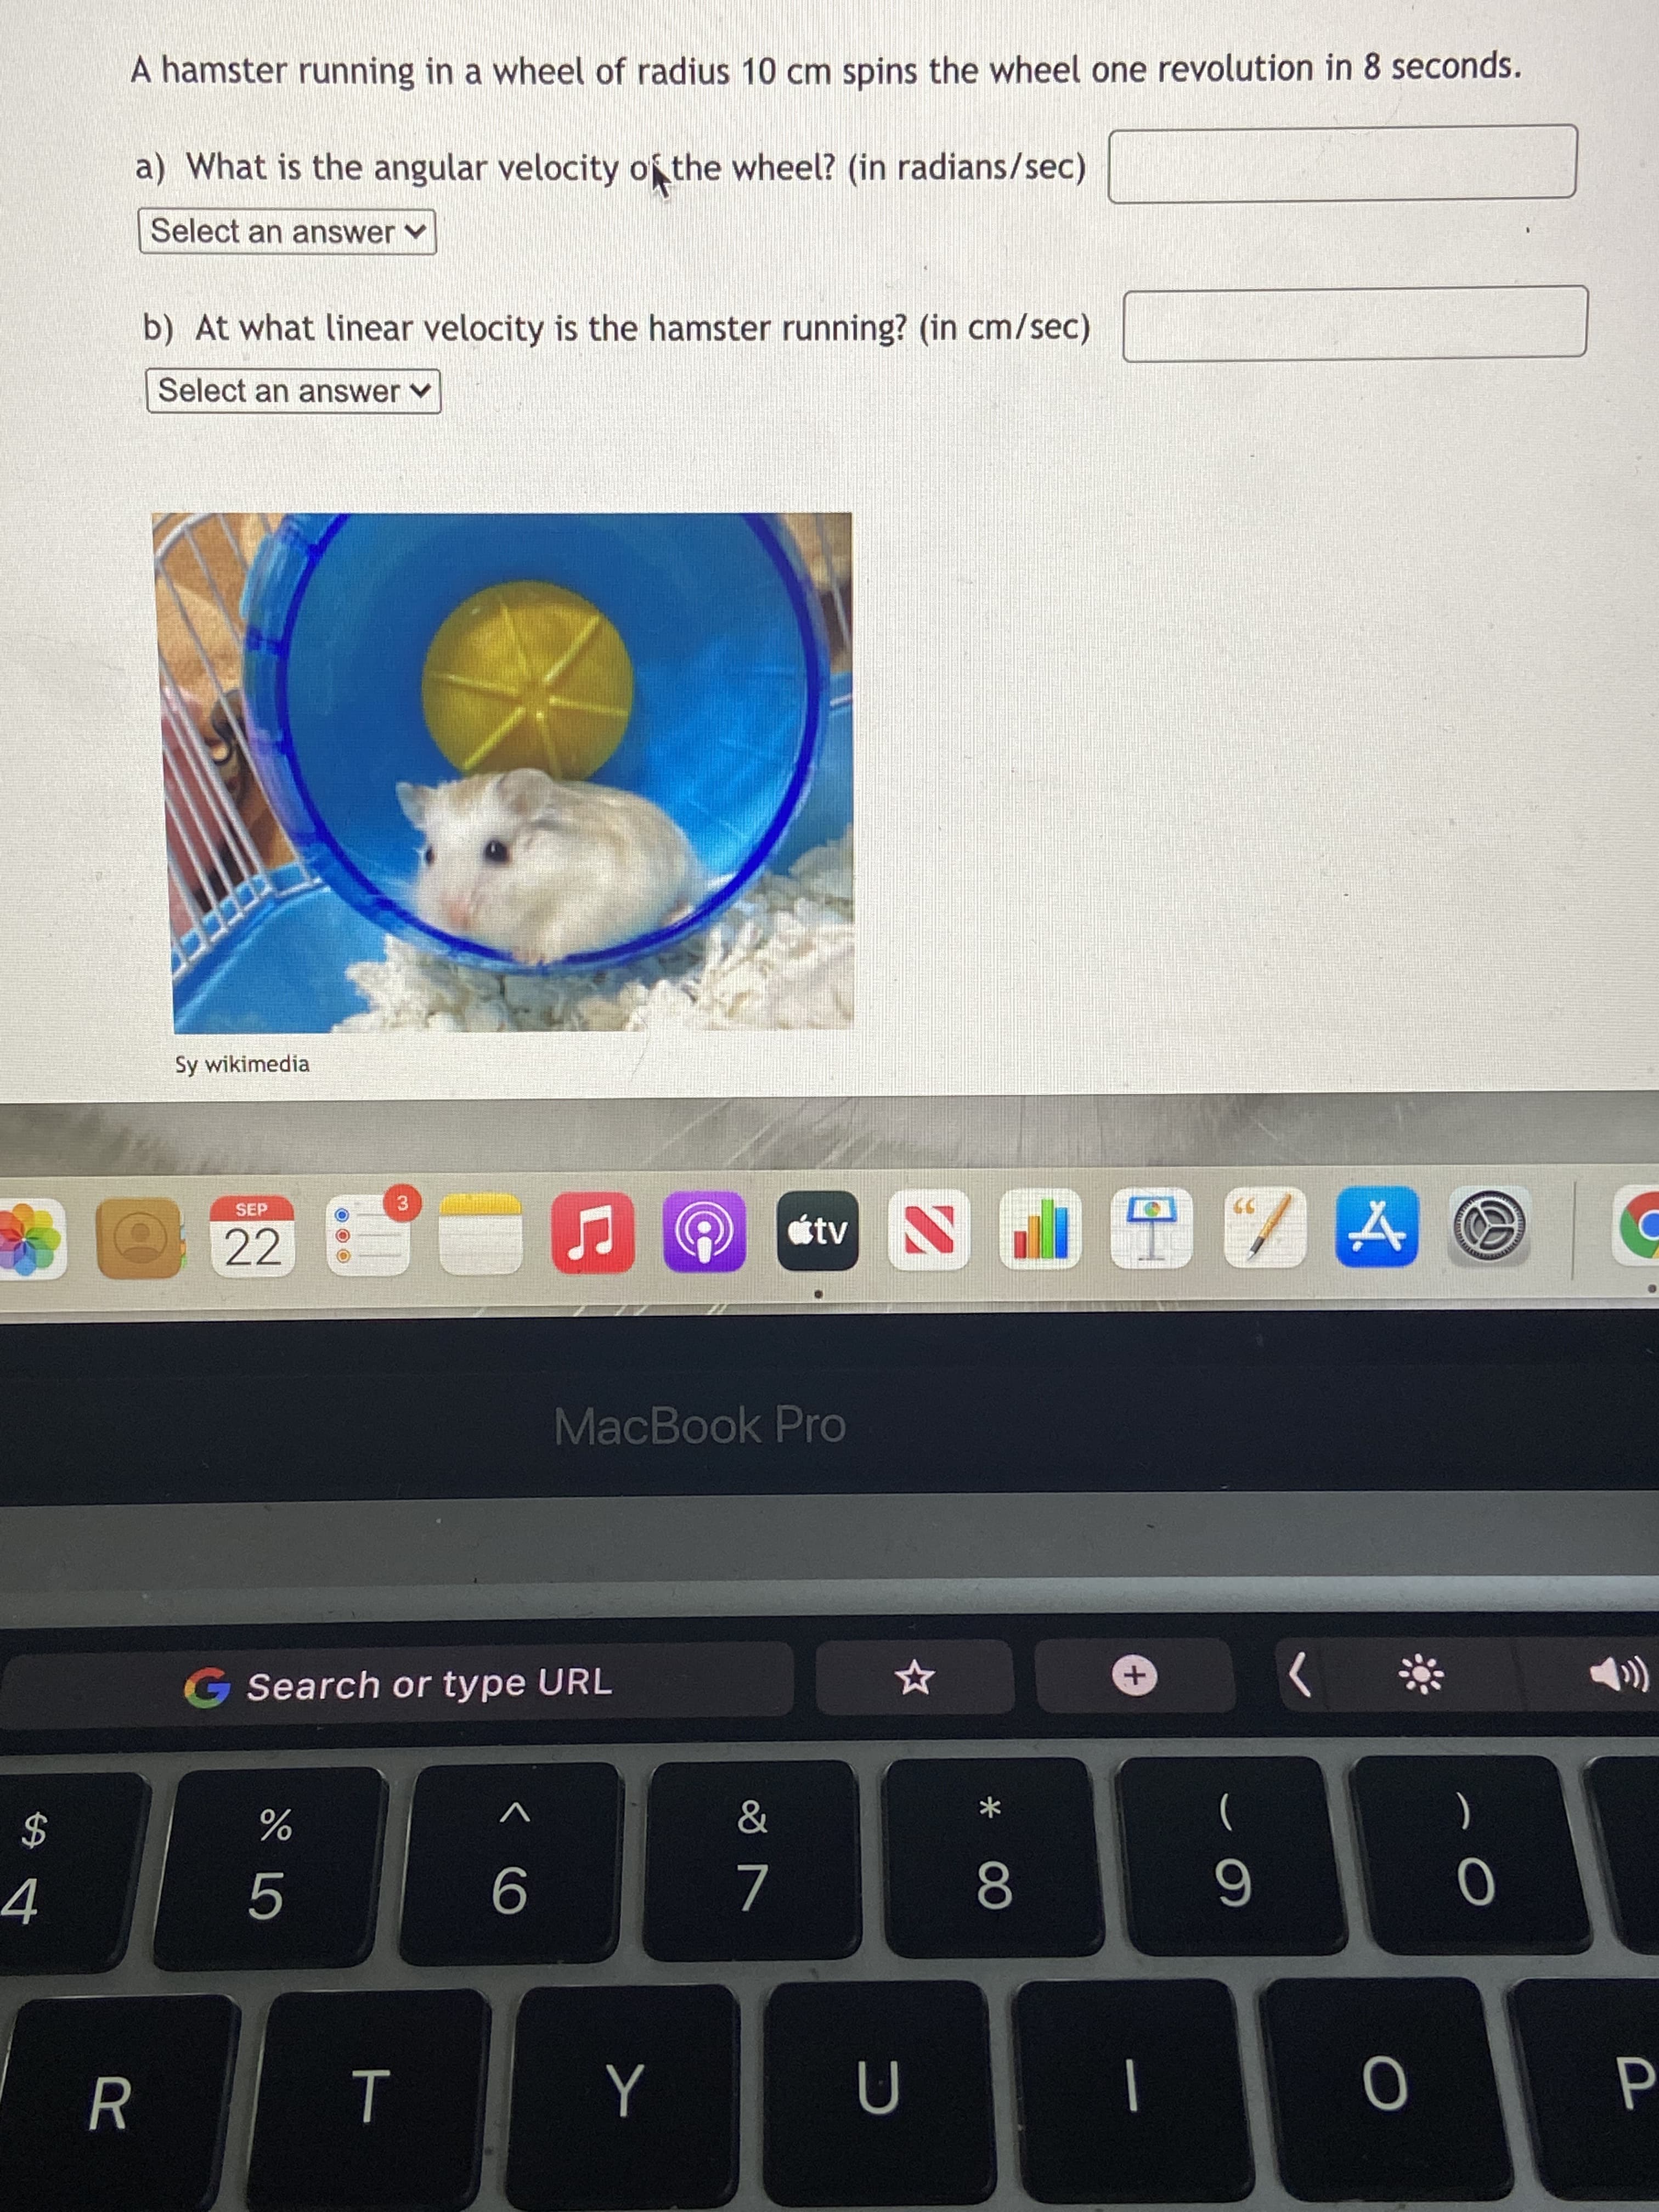 A hamster running in a wheel of radius 10 cm spins the wheel one revolution in 8 seconds.
a) What is the angular velocity ofthe wheel? (in radians/sec)
Select an answer v
b) At what linear velocity is the hamster running? (in cm/sec)
Select an answer v
